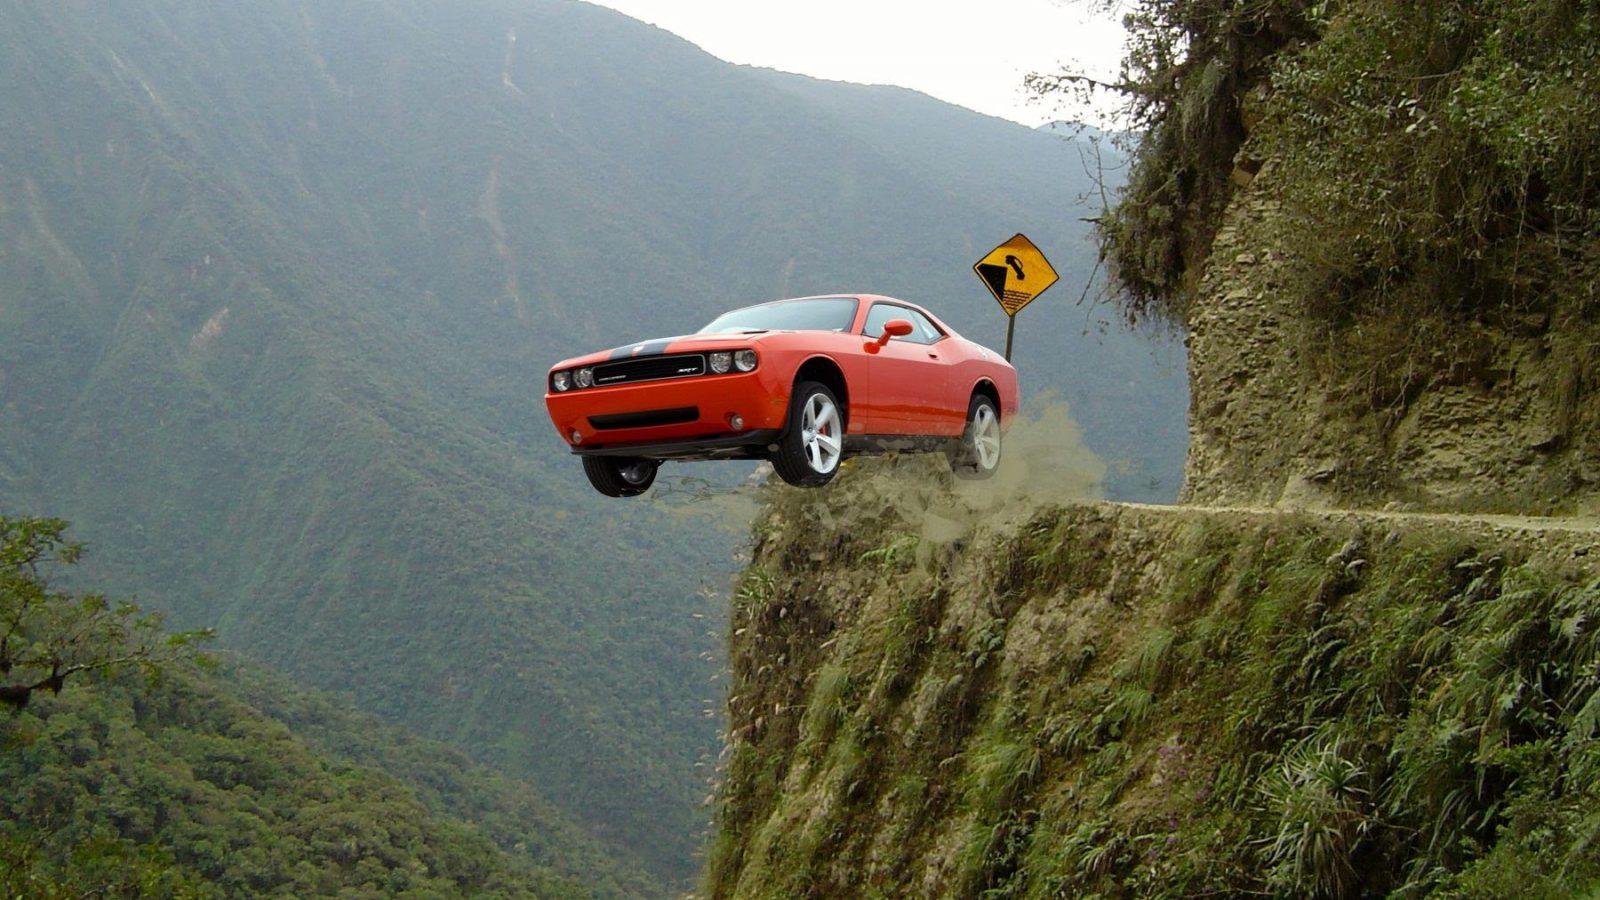 10 Dangerous Roads You Would Never Want to Drive On - CAR FROM JAPAN